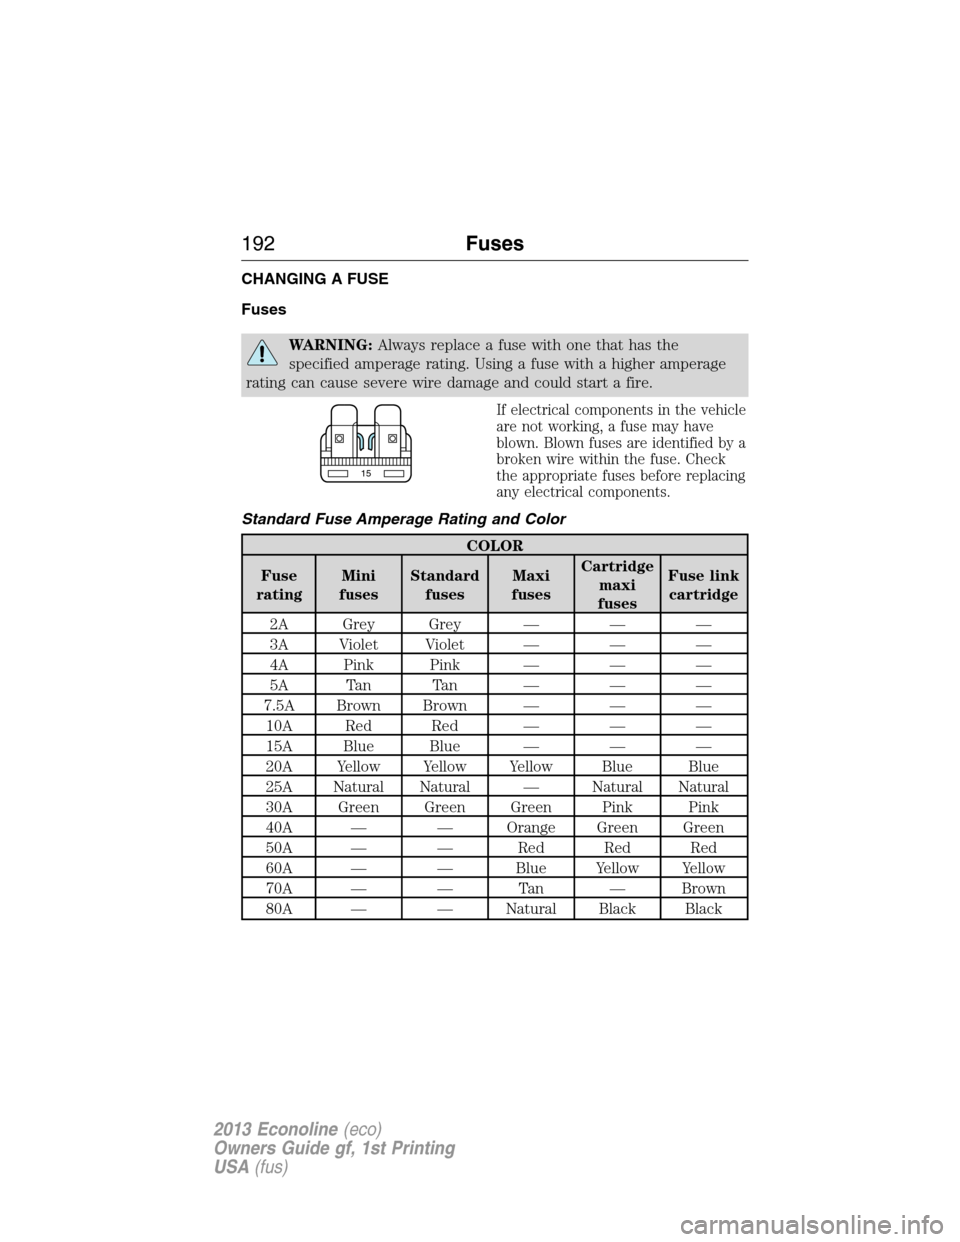 FORD E SERIES 2013 4.G Owners Manual CHANGING A FUSE
Fuses
WARNING:Always replace a fuse with one that has the
specified amperage rating. Using a fuse with a higher amperage
rating can cause severe wire damage and could start a fire.
If 